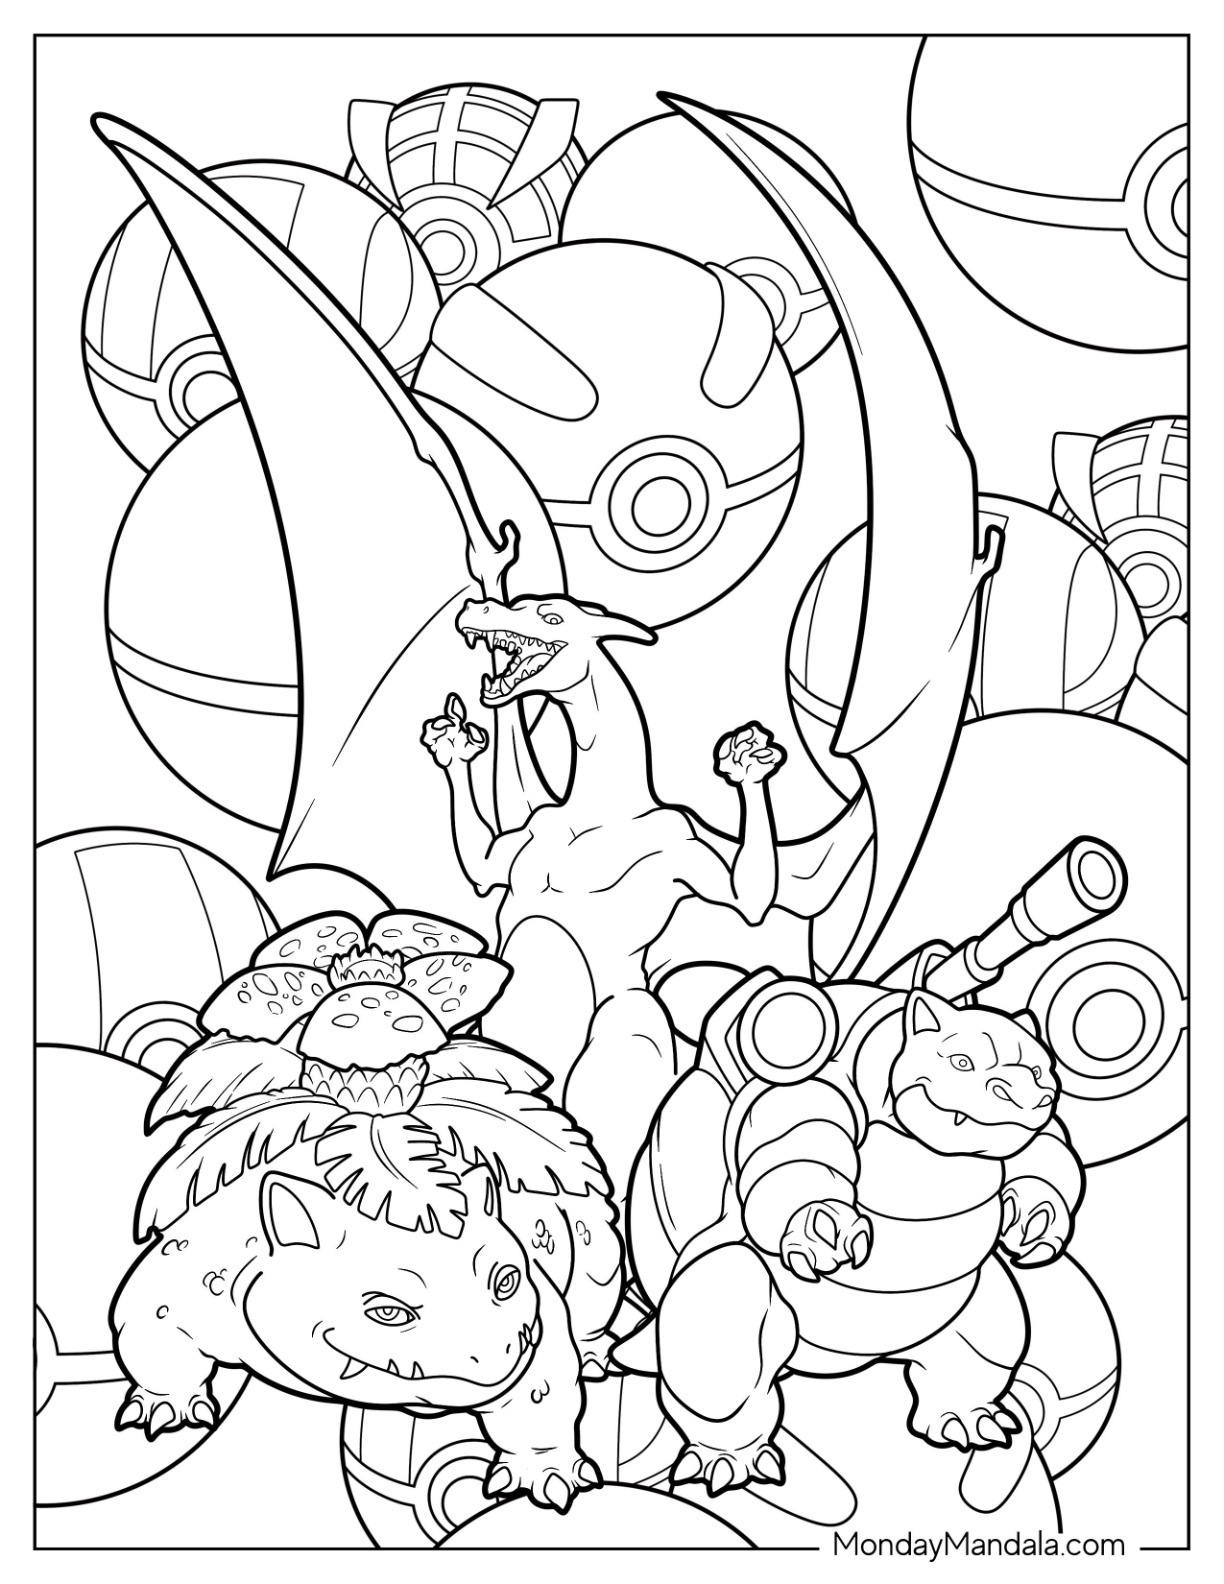 Blastoise coloring pages free pdf printables